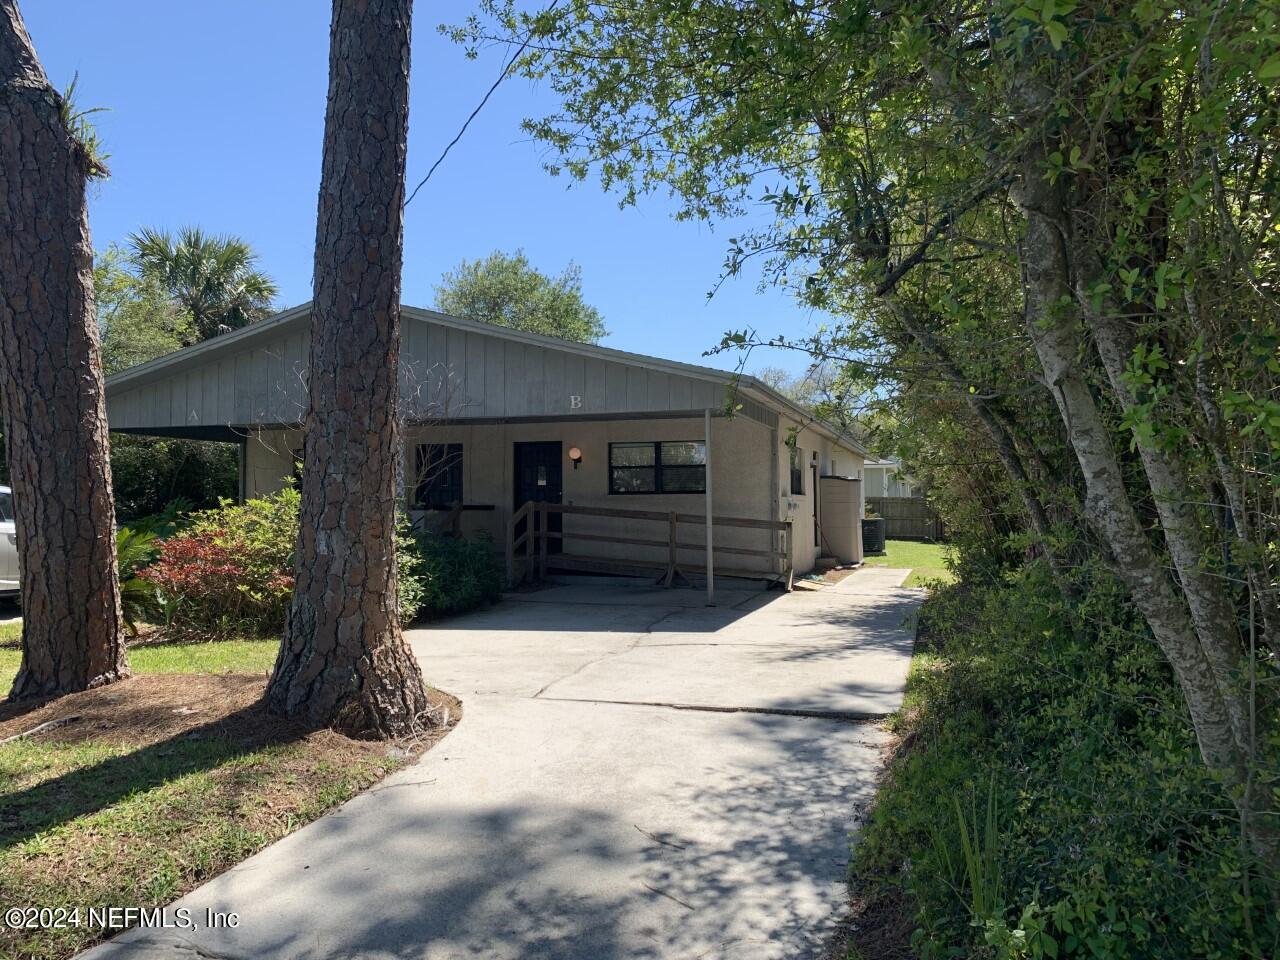 Jacksonville Beach, FL home for sale located at 1200 16th Avenue S Unit B, Jacksonville Beach, FL 32250